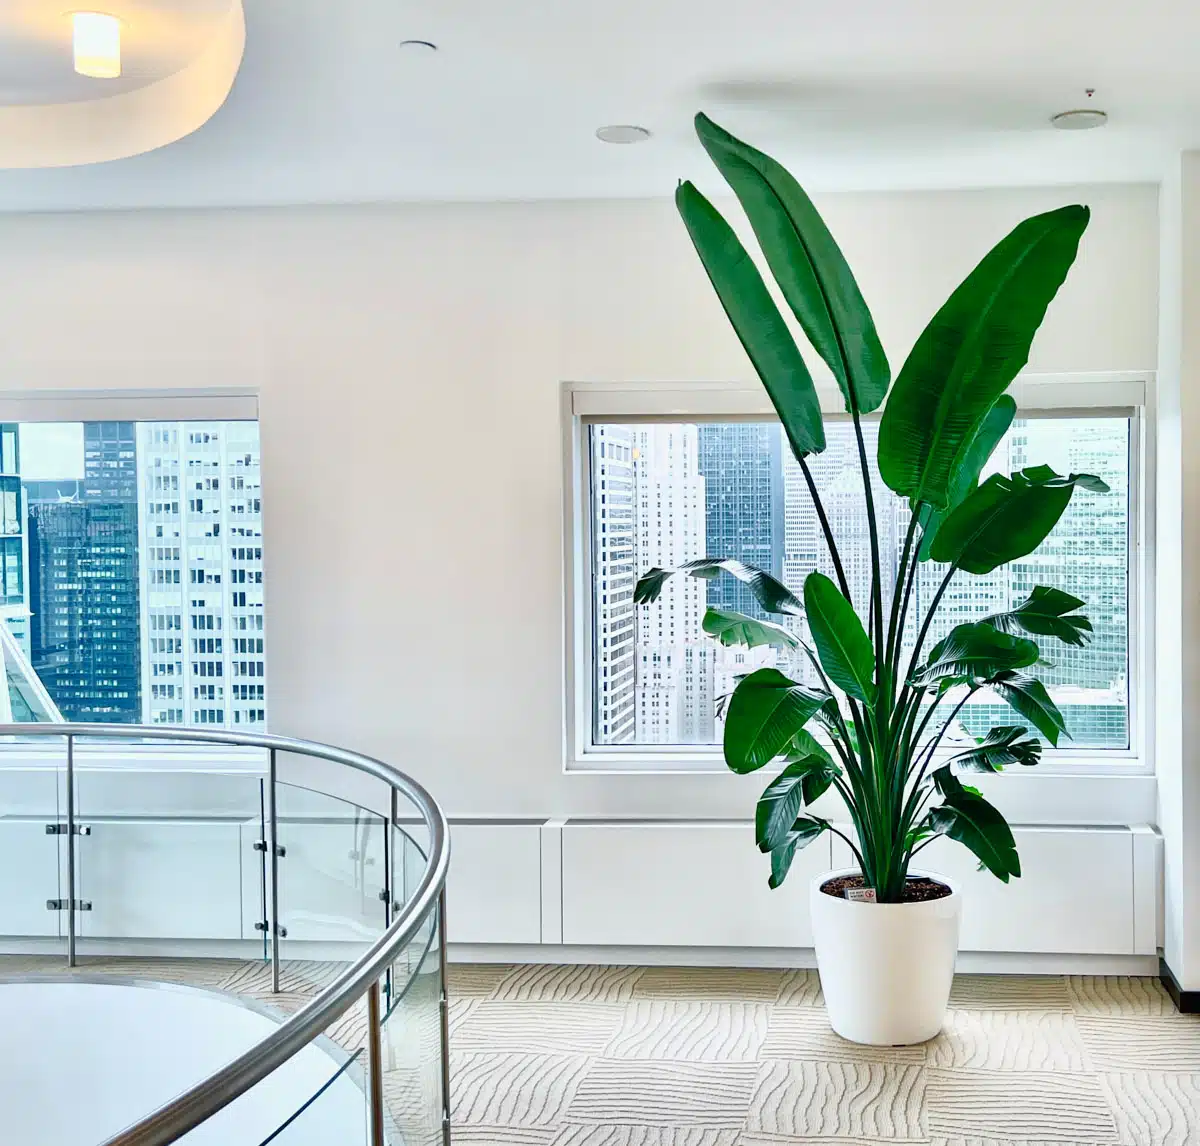 A tall Bird of Paradise plant with vibrant green leaves in a white pot, positioned in a well-lit room with large windows showcasing a cityscape, creating a serene indoor oasis in an urban setting.